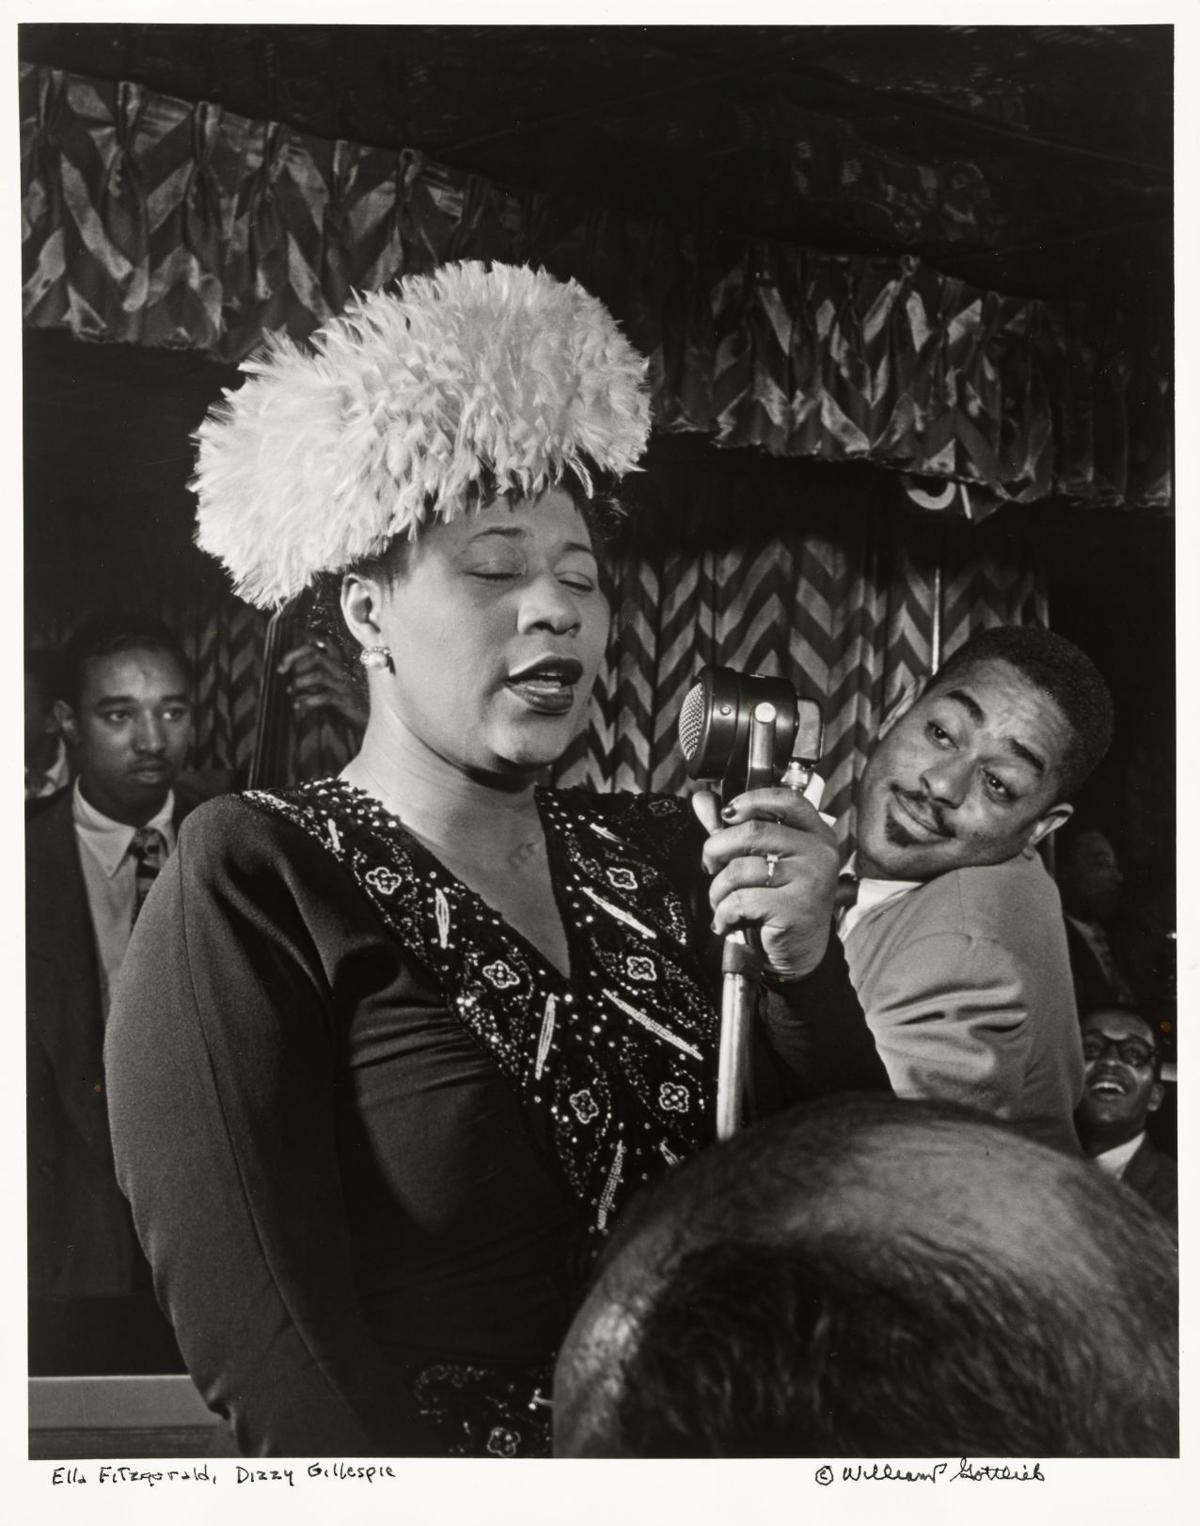 Ella Fitzgerald sings in Washington, about 1947, as Dilly Gillespie and bassist Ray Brown watch.